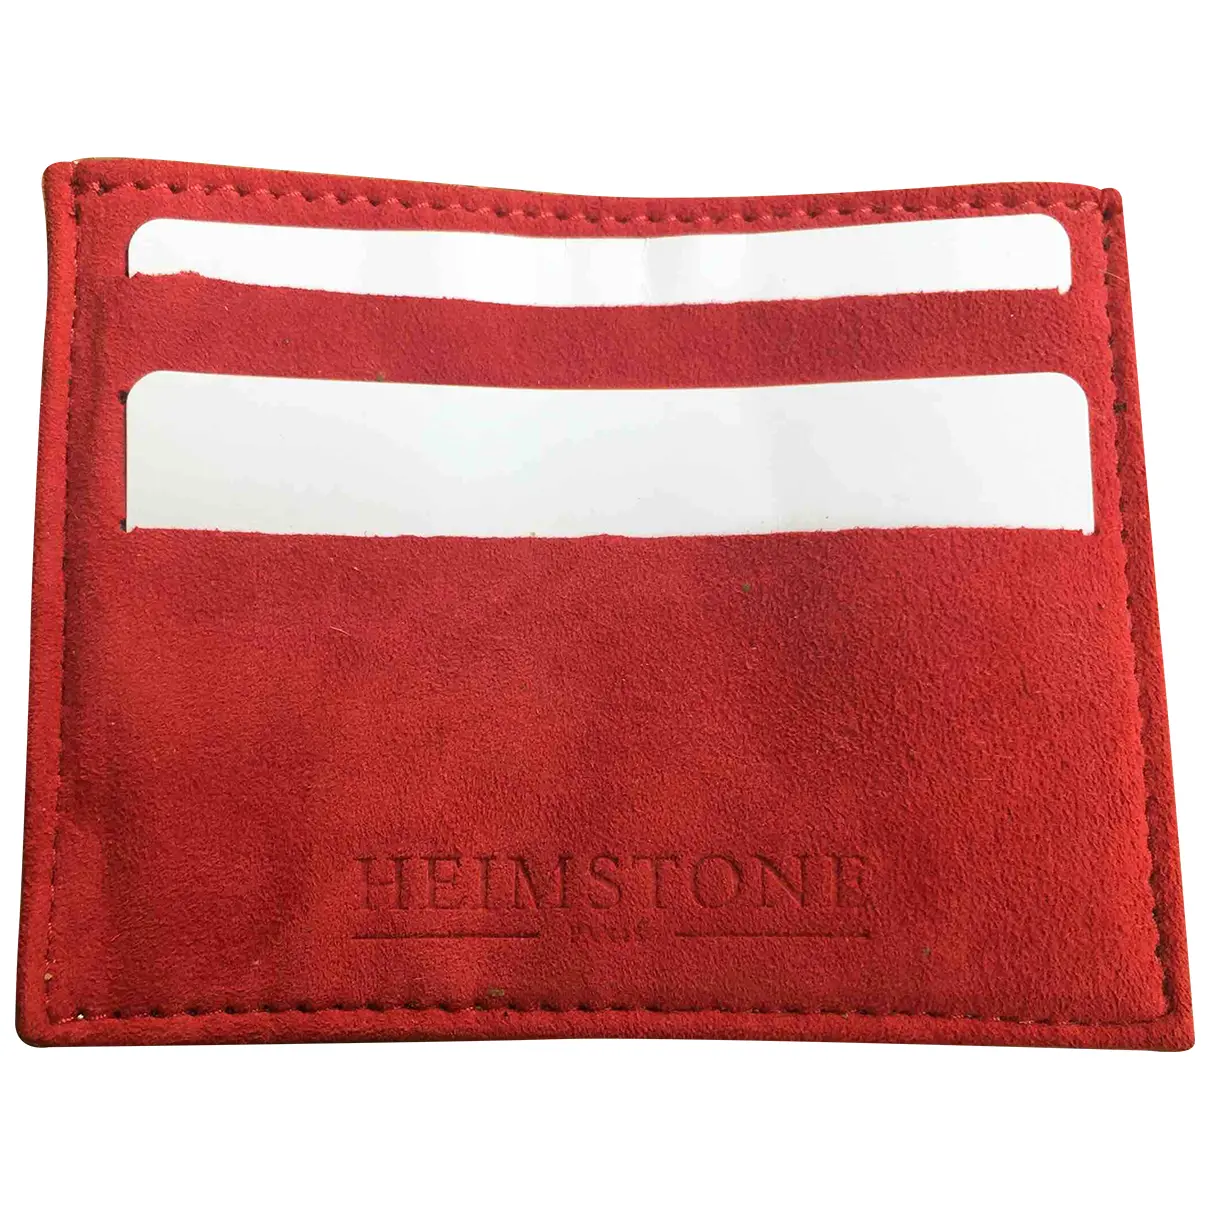 Leather card wallet Heimstone